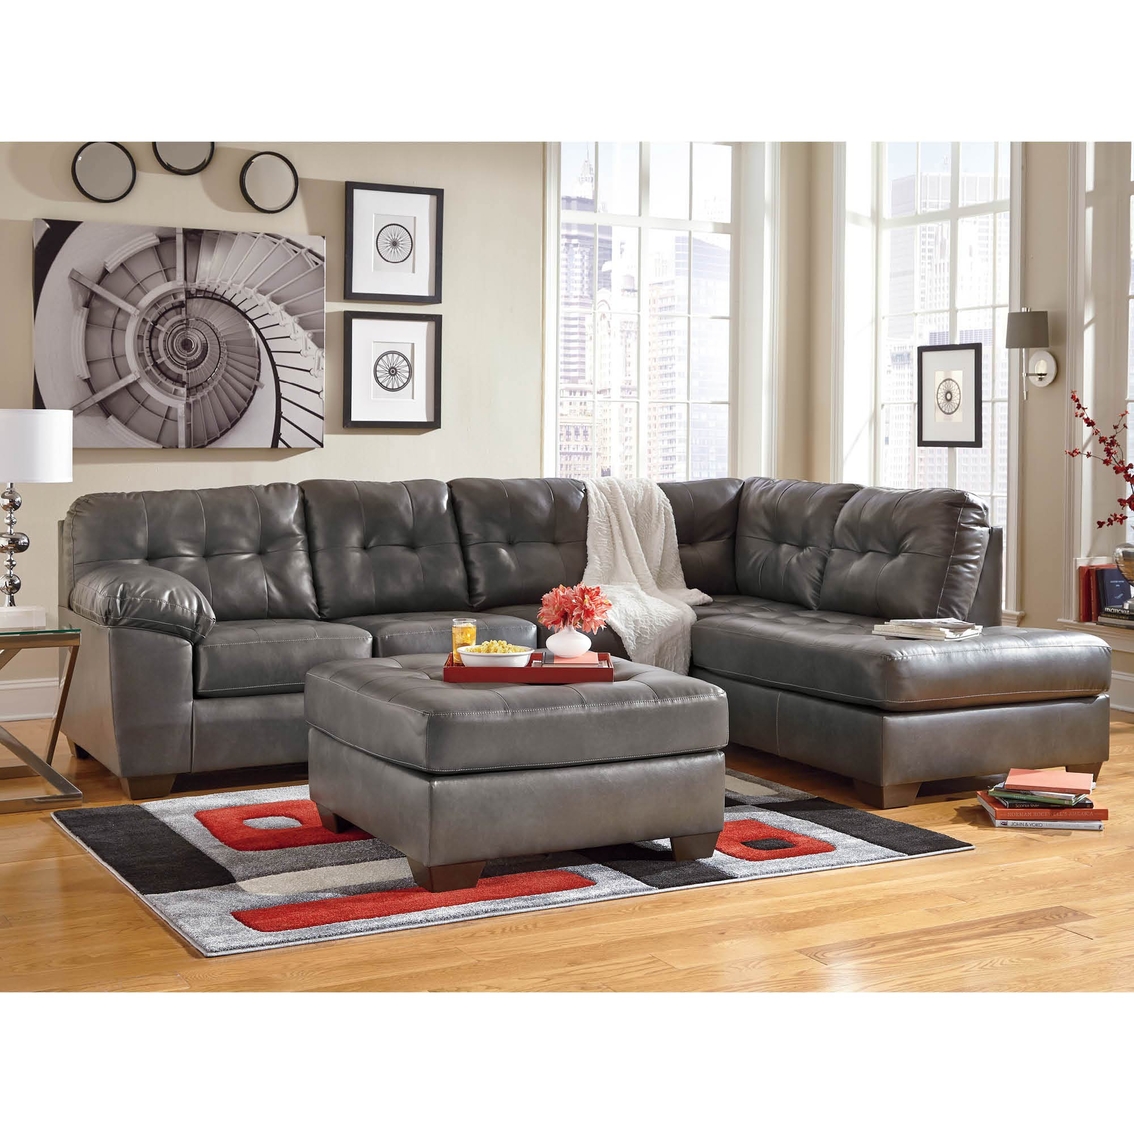 Signature Design By Ashley Alliston DuraBlend 2 Pc. Sectional RAF Chaise/LAF Sofa - Image 2 of 3